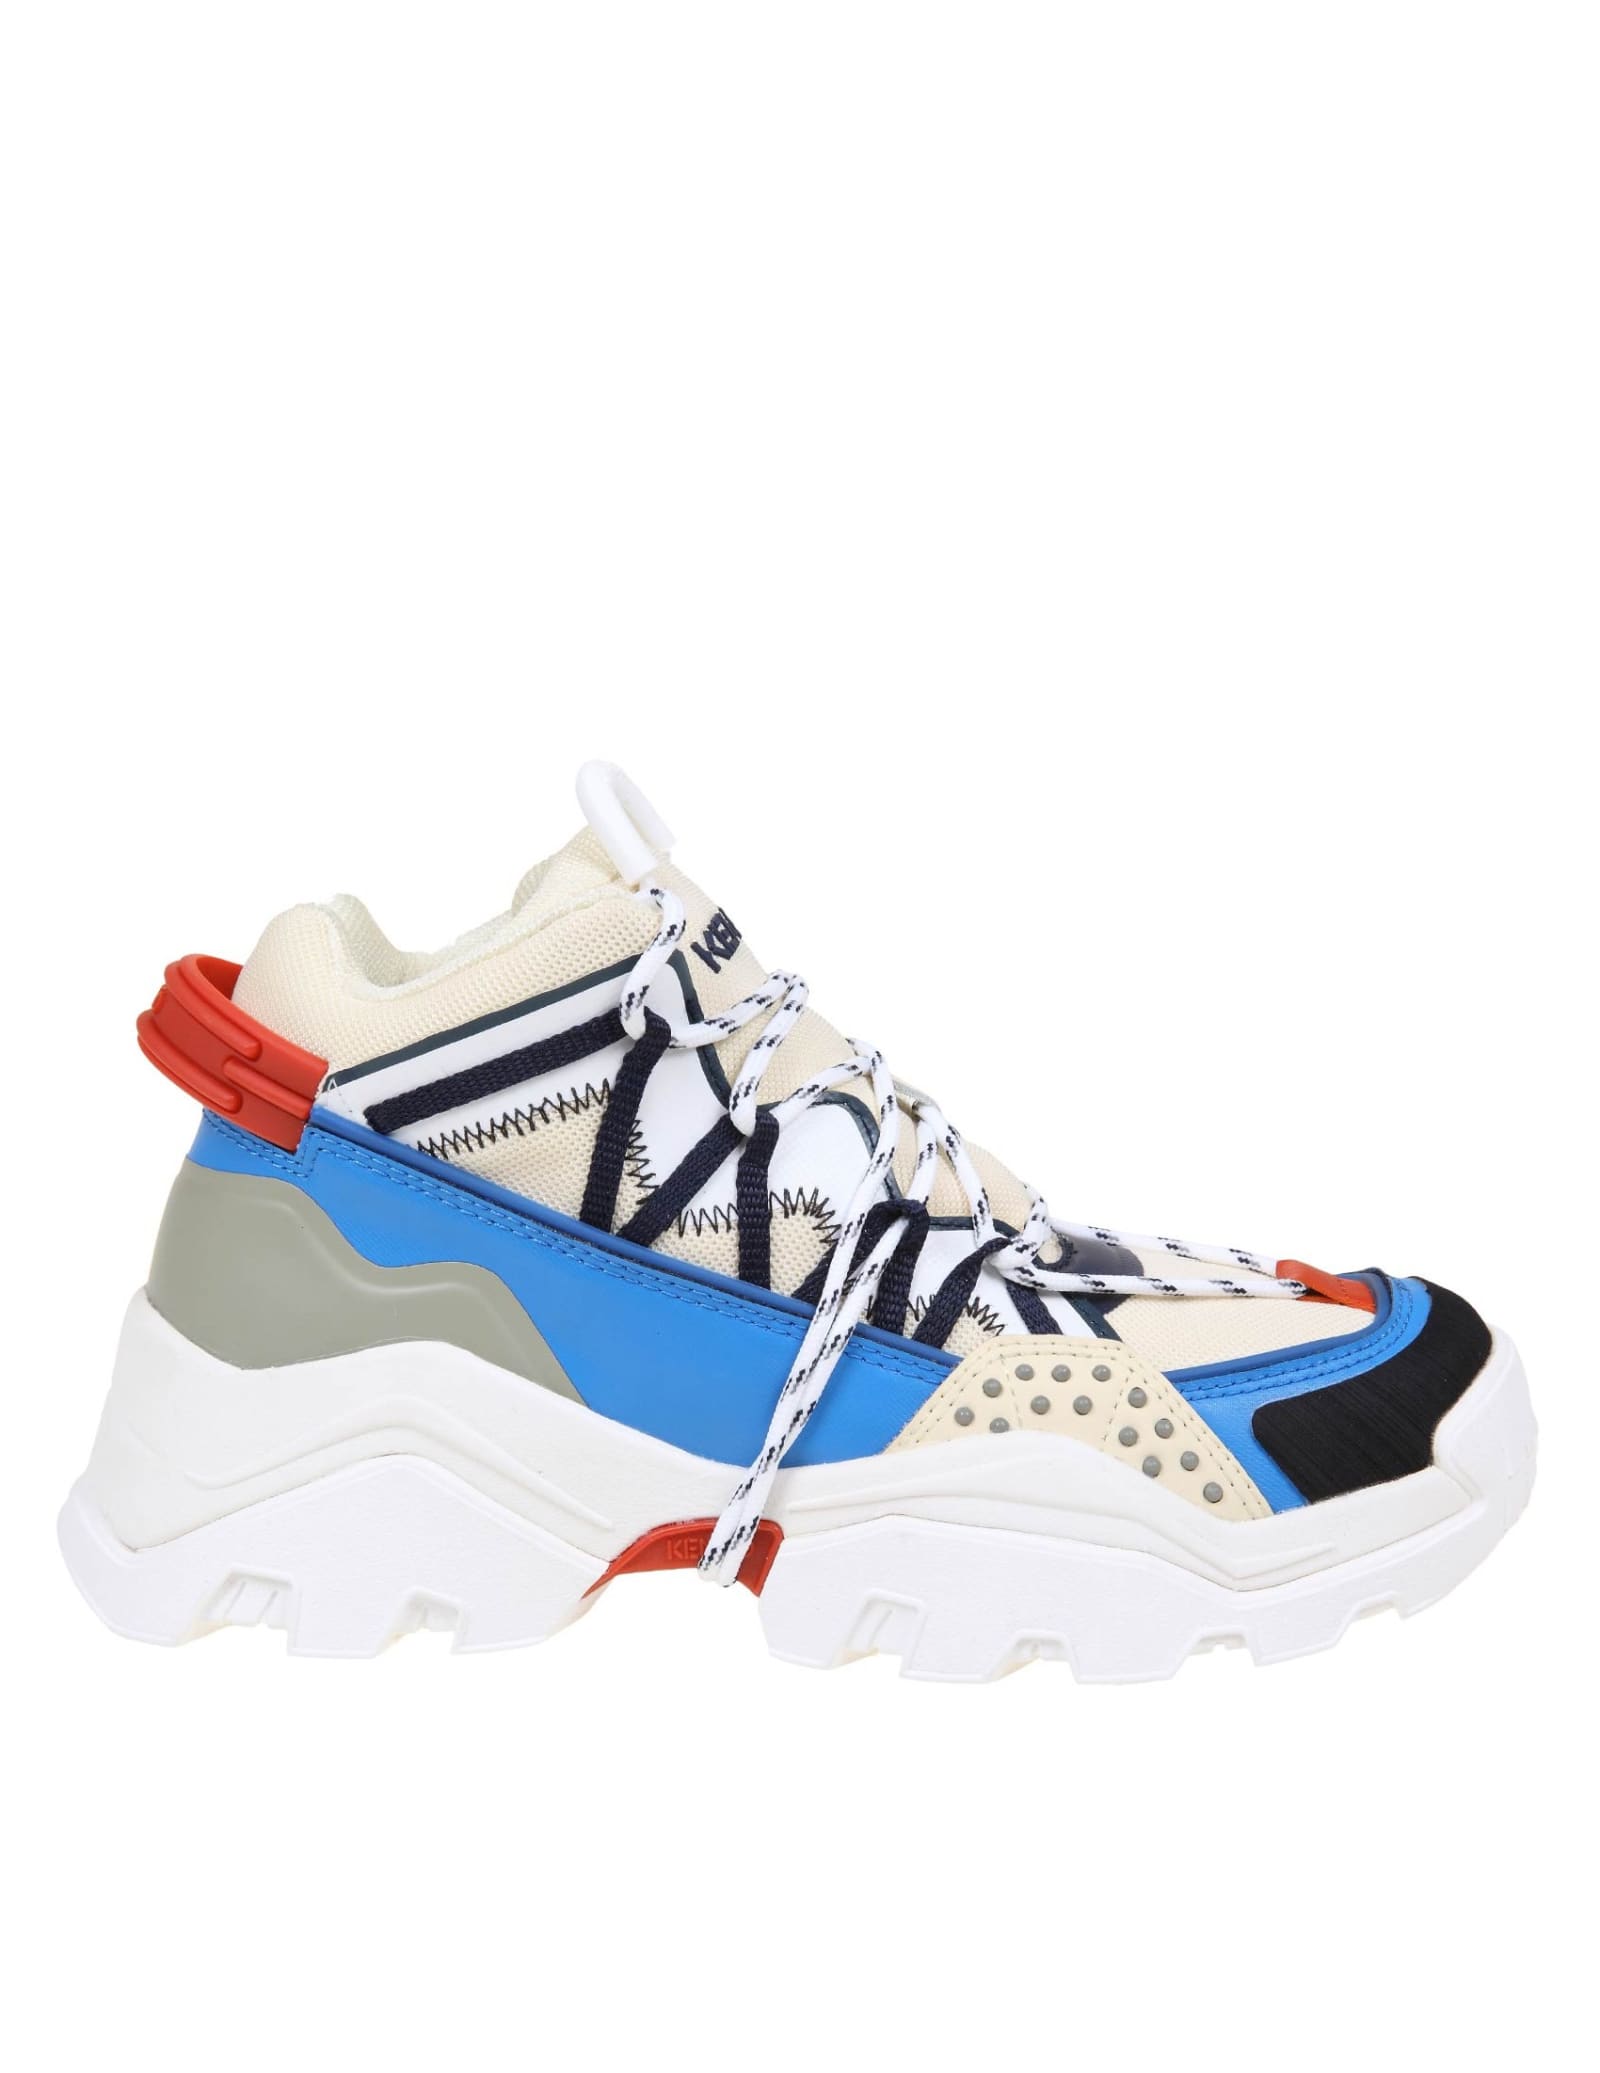 Buy Kenzo Inka Sneakers In Leather And Multicolor Fabric online, shop Kenzo shoes with free shipping